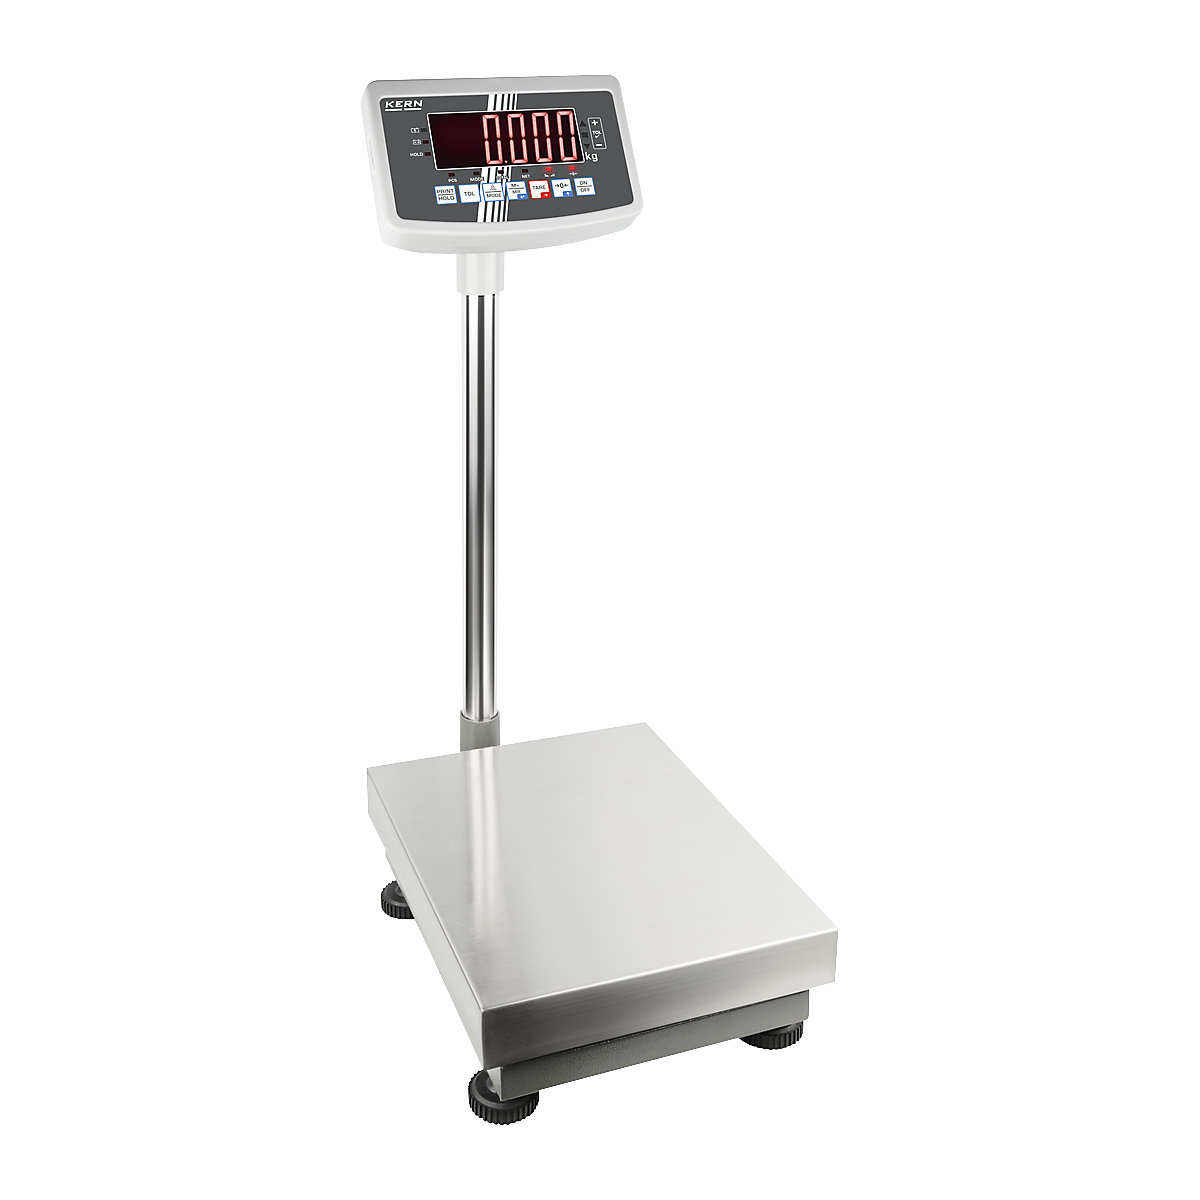 Platform scales – KERN, with large weighing plate, weighing range up to 60 kg, read-out accuracy 5 g-2